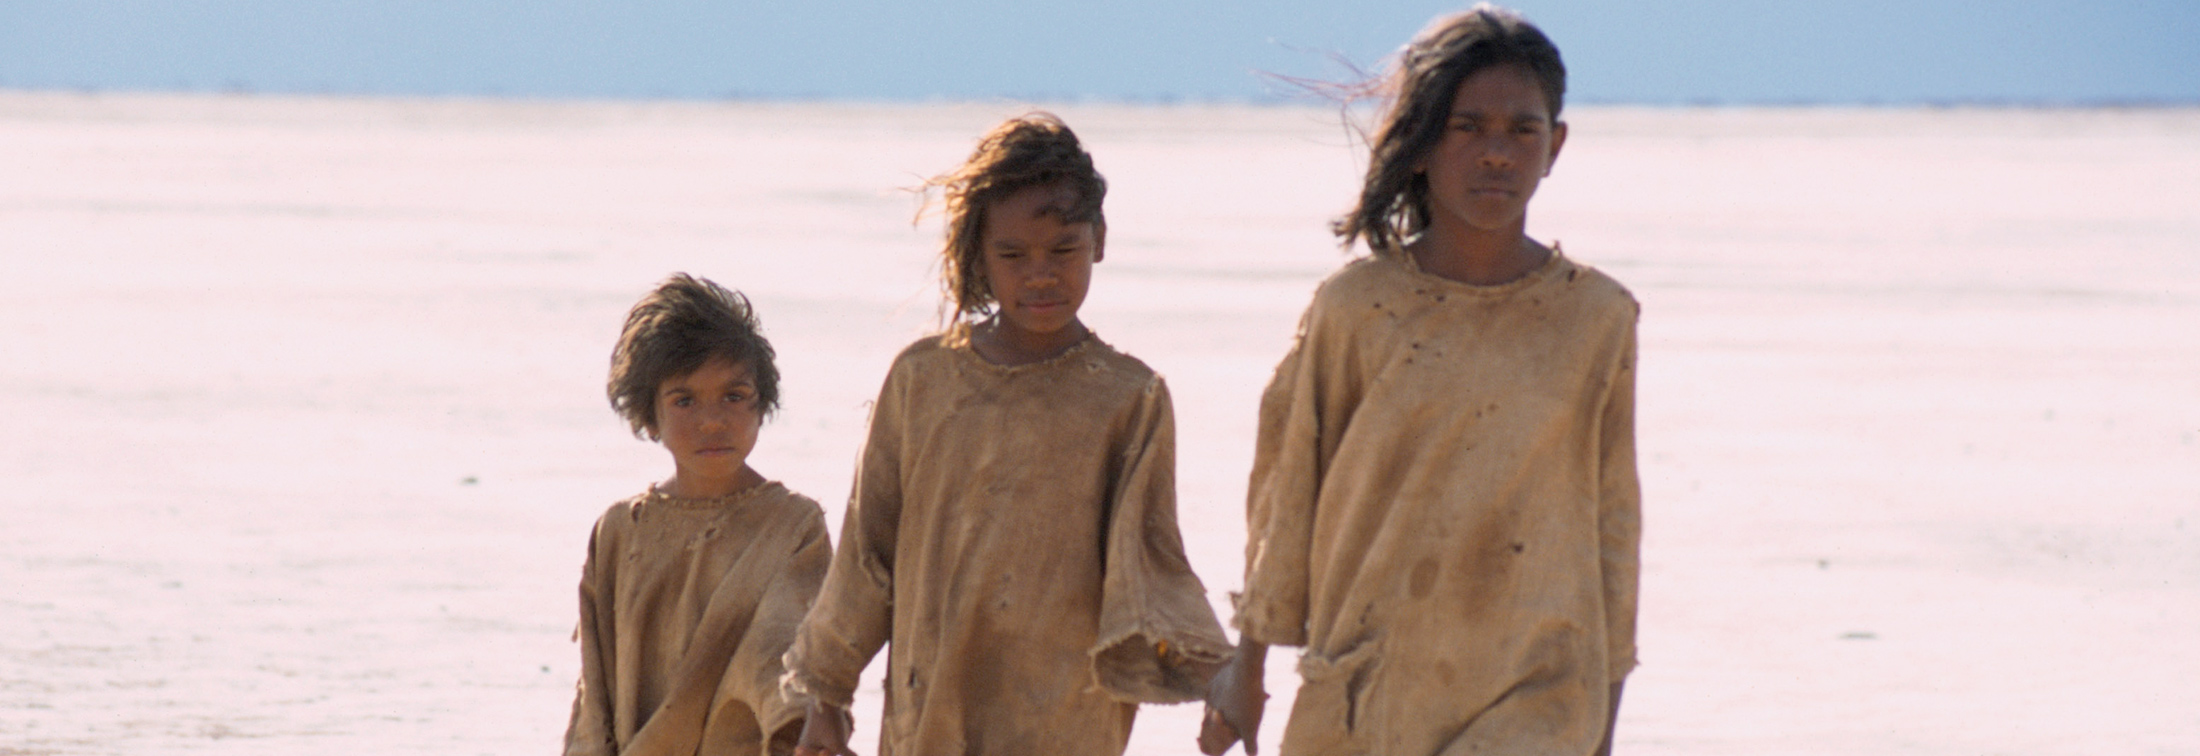 Rabbit-Proof Fence - The Aussie classic released on Blu-ray for the first time